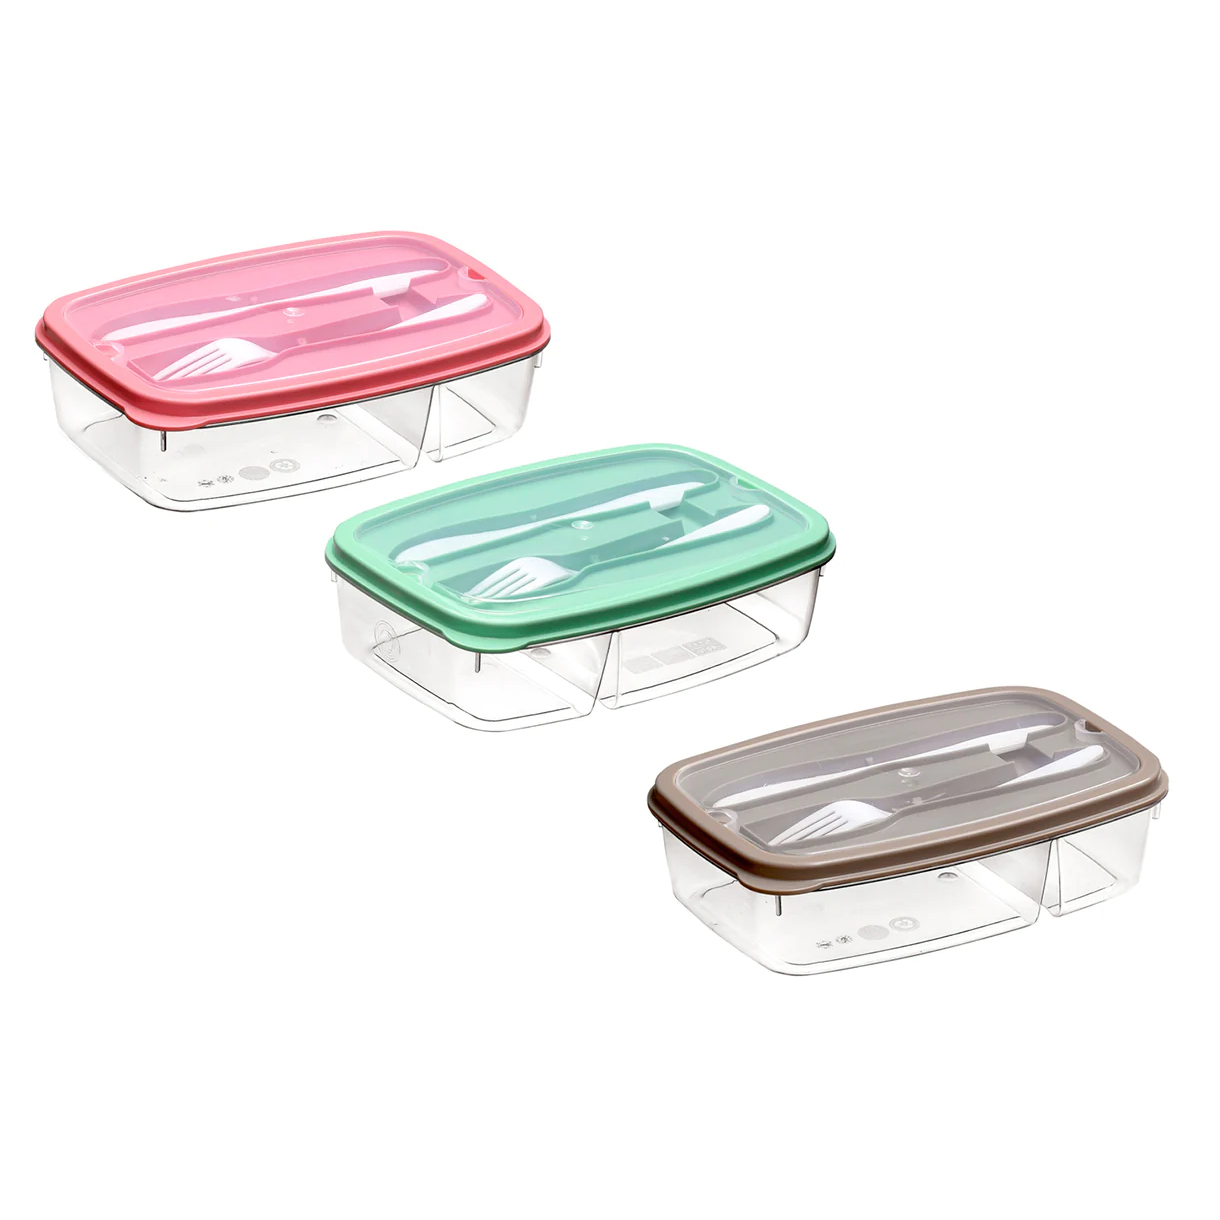 Rectangular Food storage container with cutlery